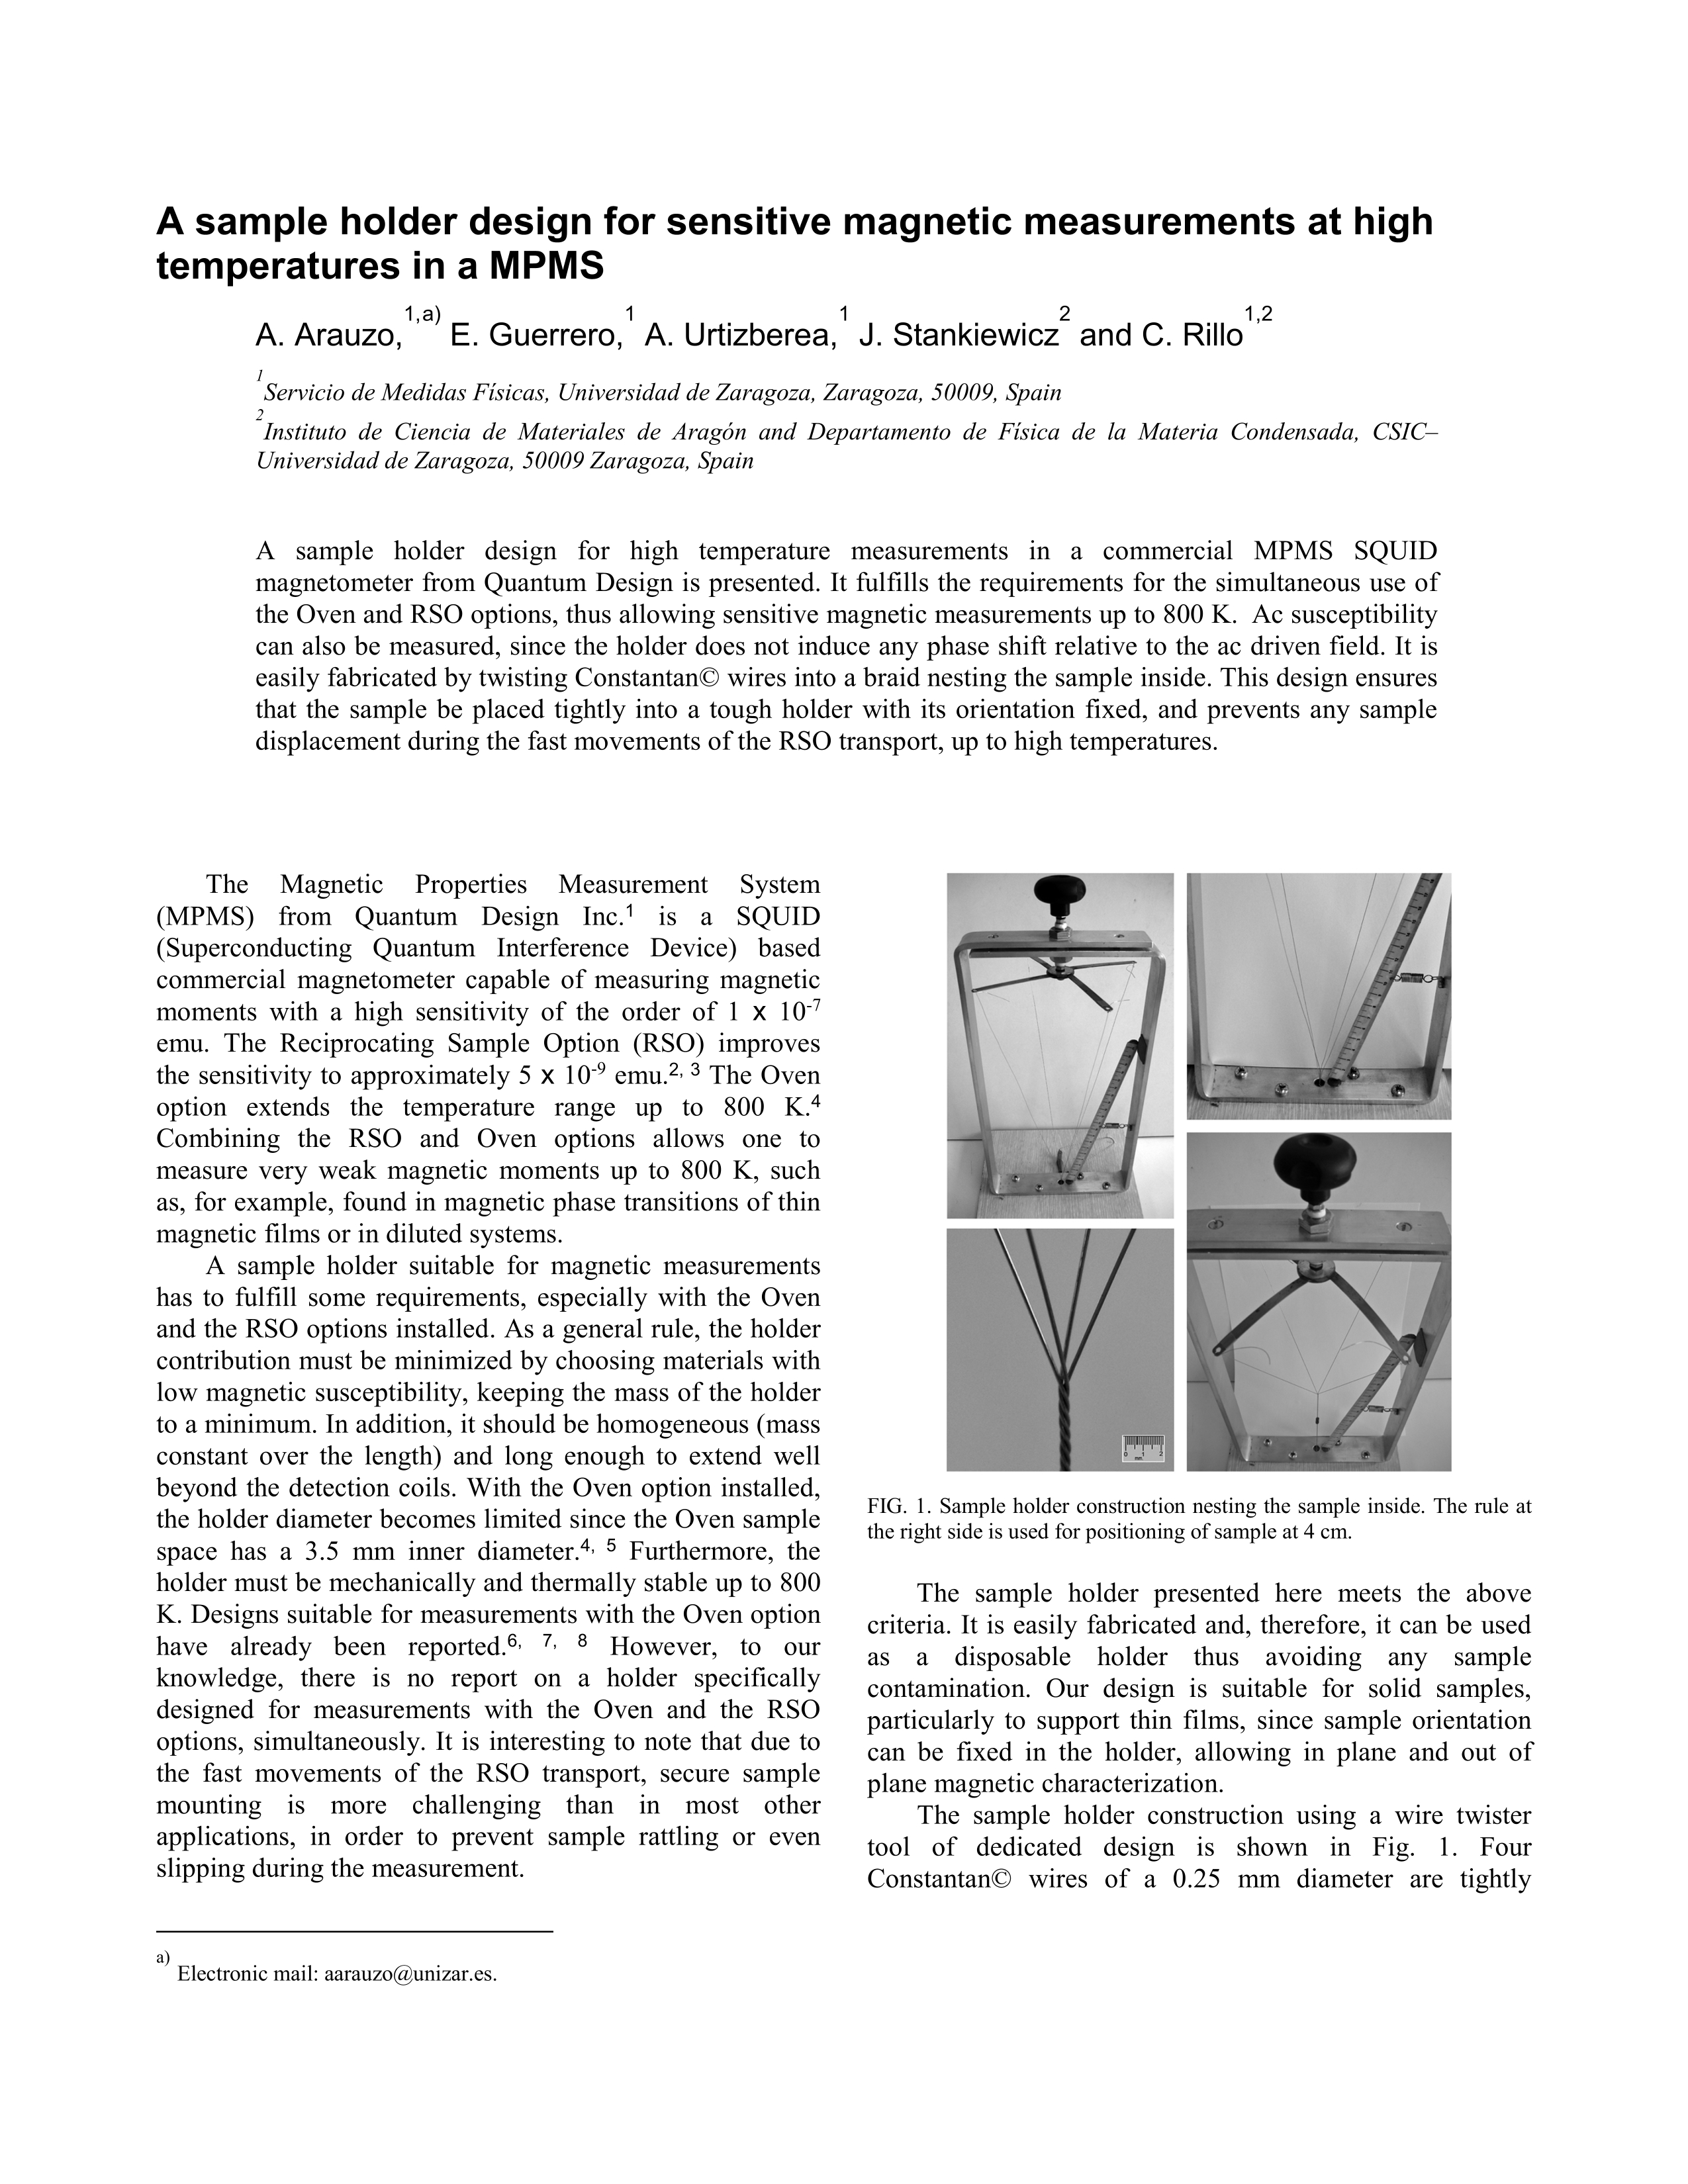 Note: A sample holder design for sensitive magnetic measurements at high temperatures in a magnetic properties measurement system